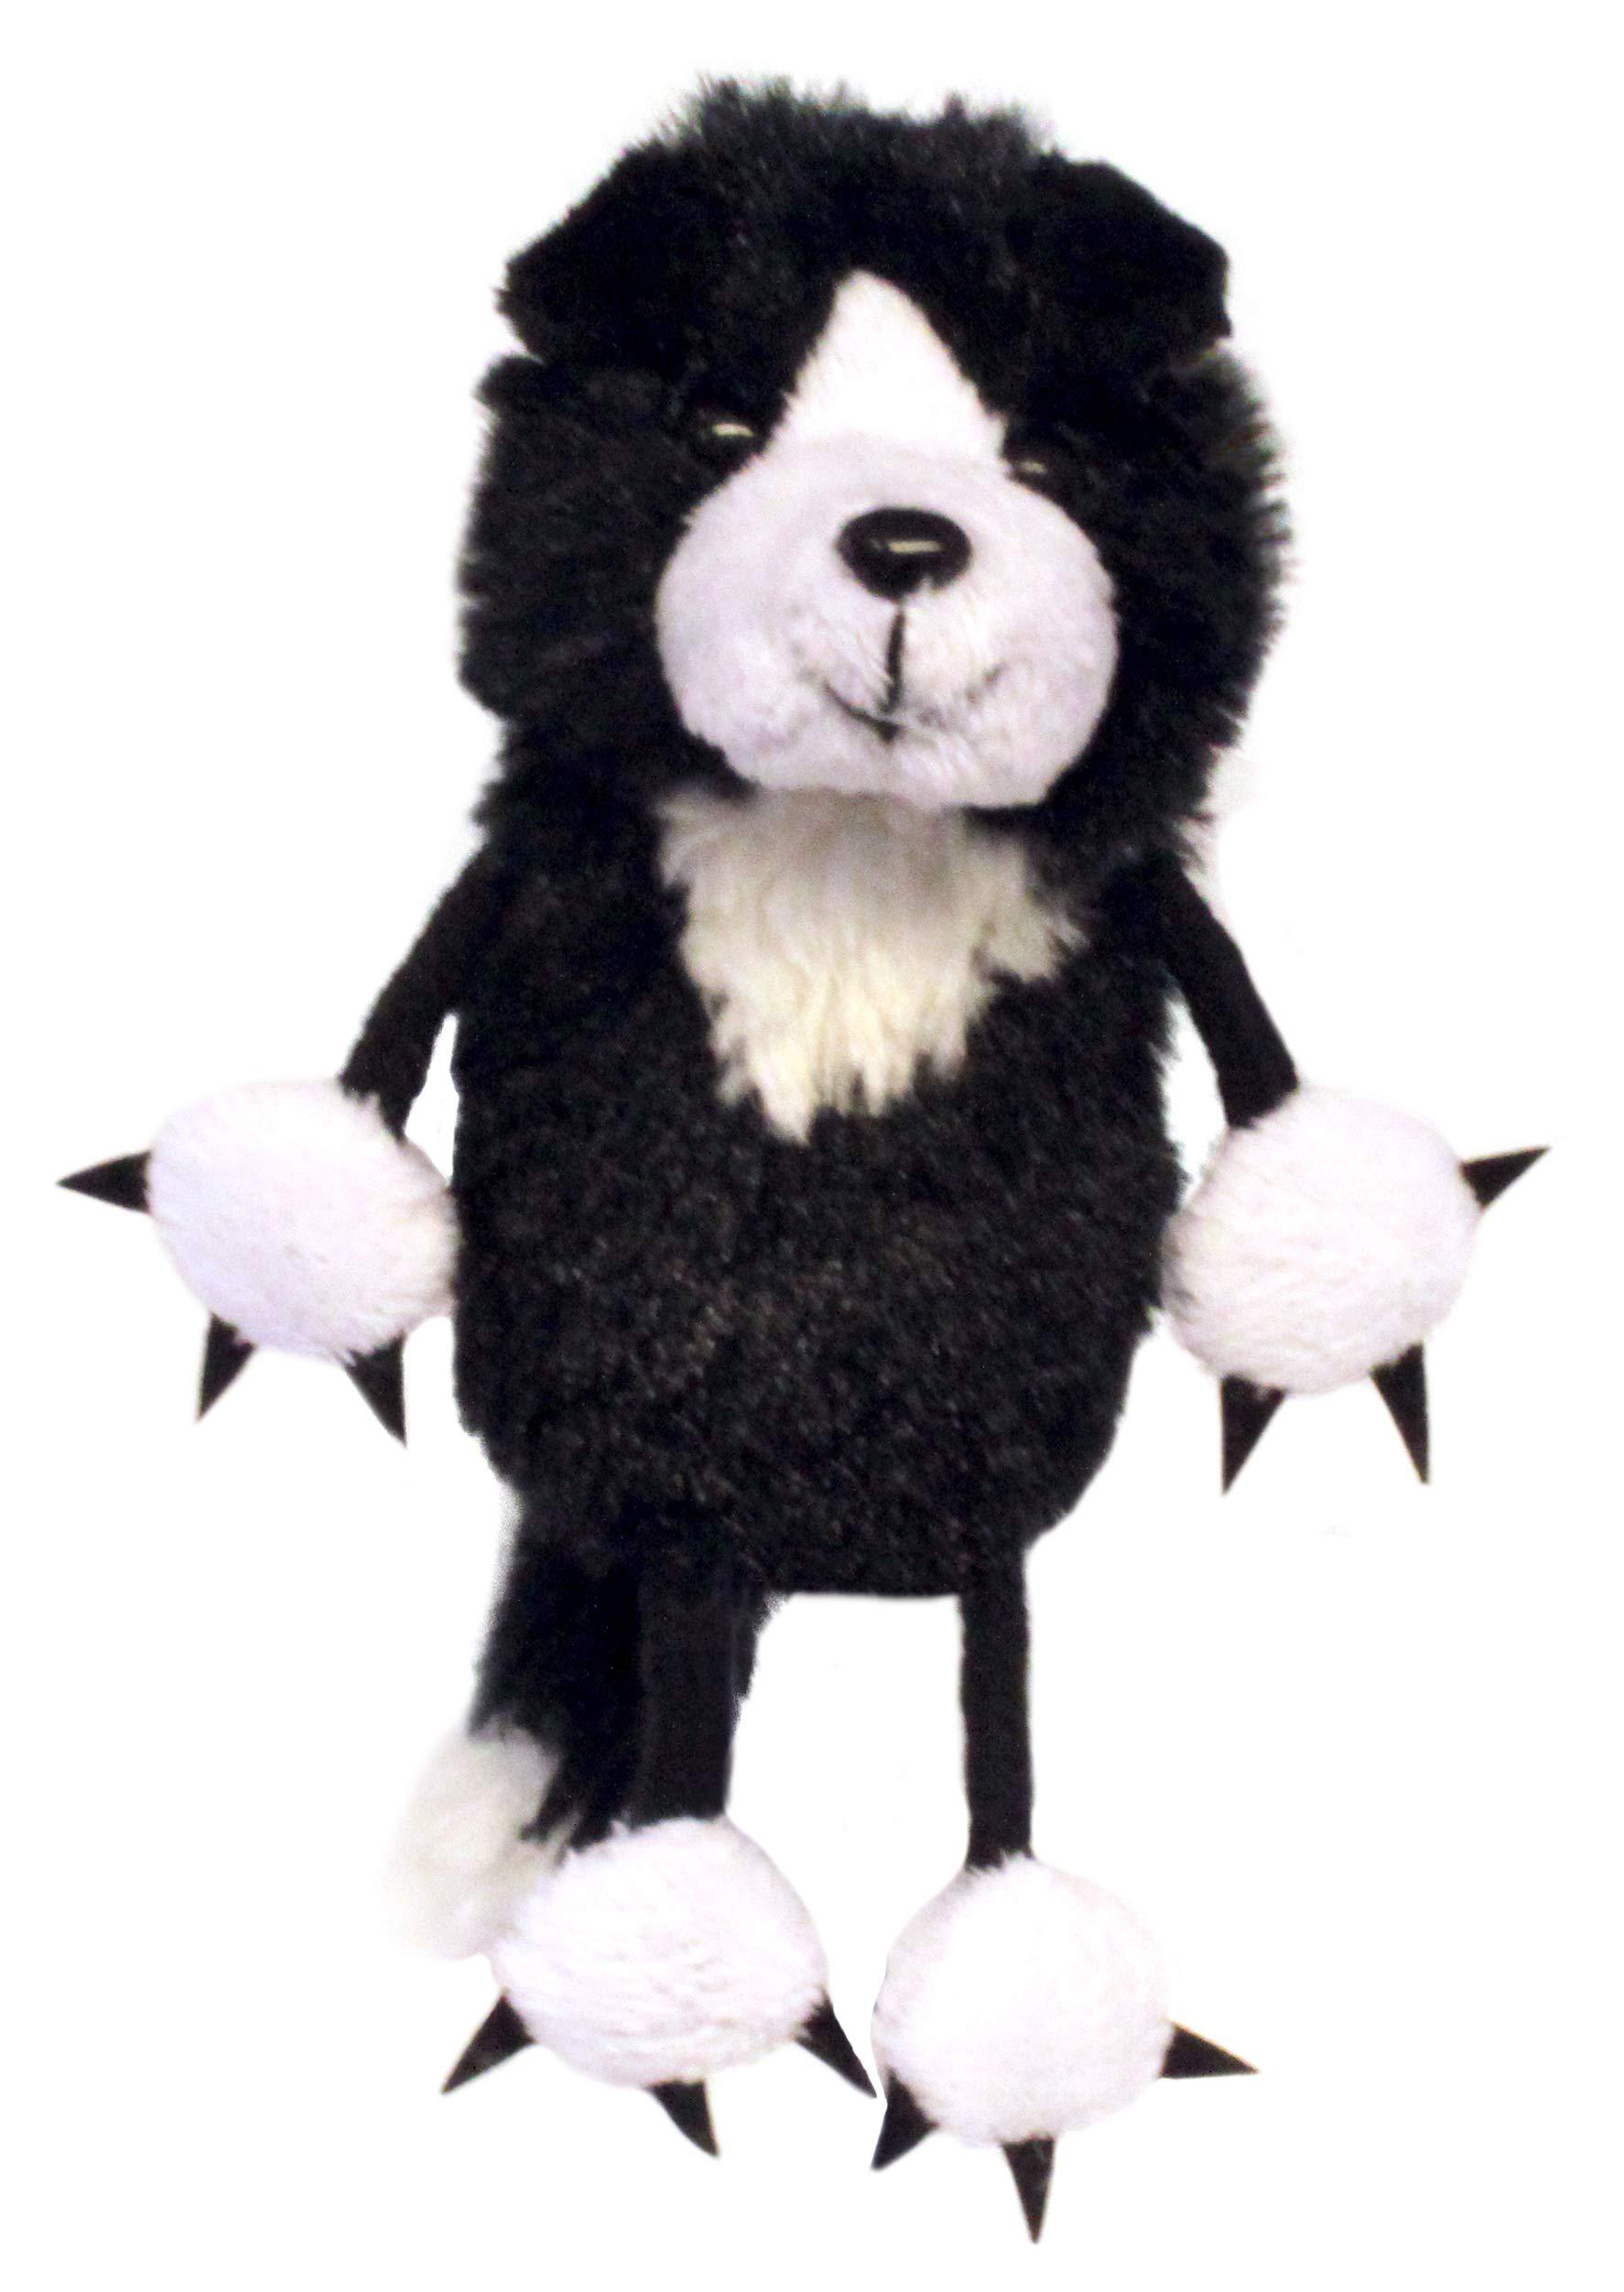 the puppet company border collie finger children toys puppets,